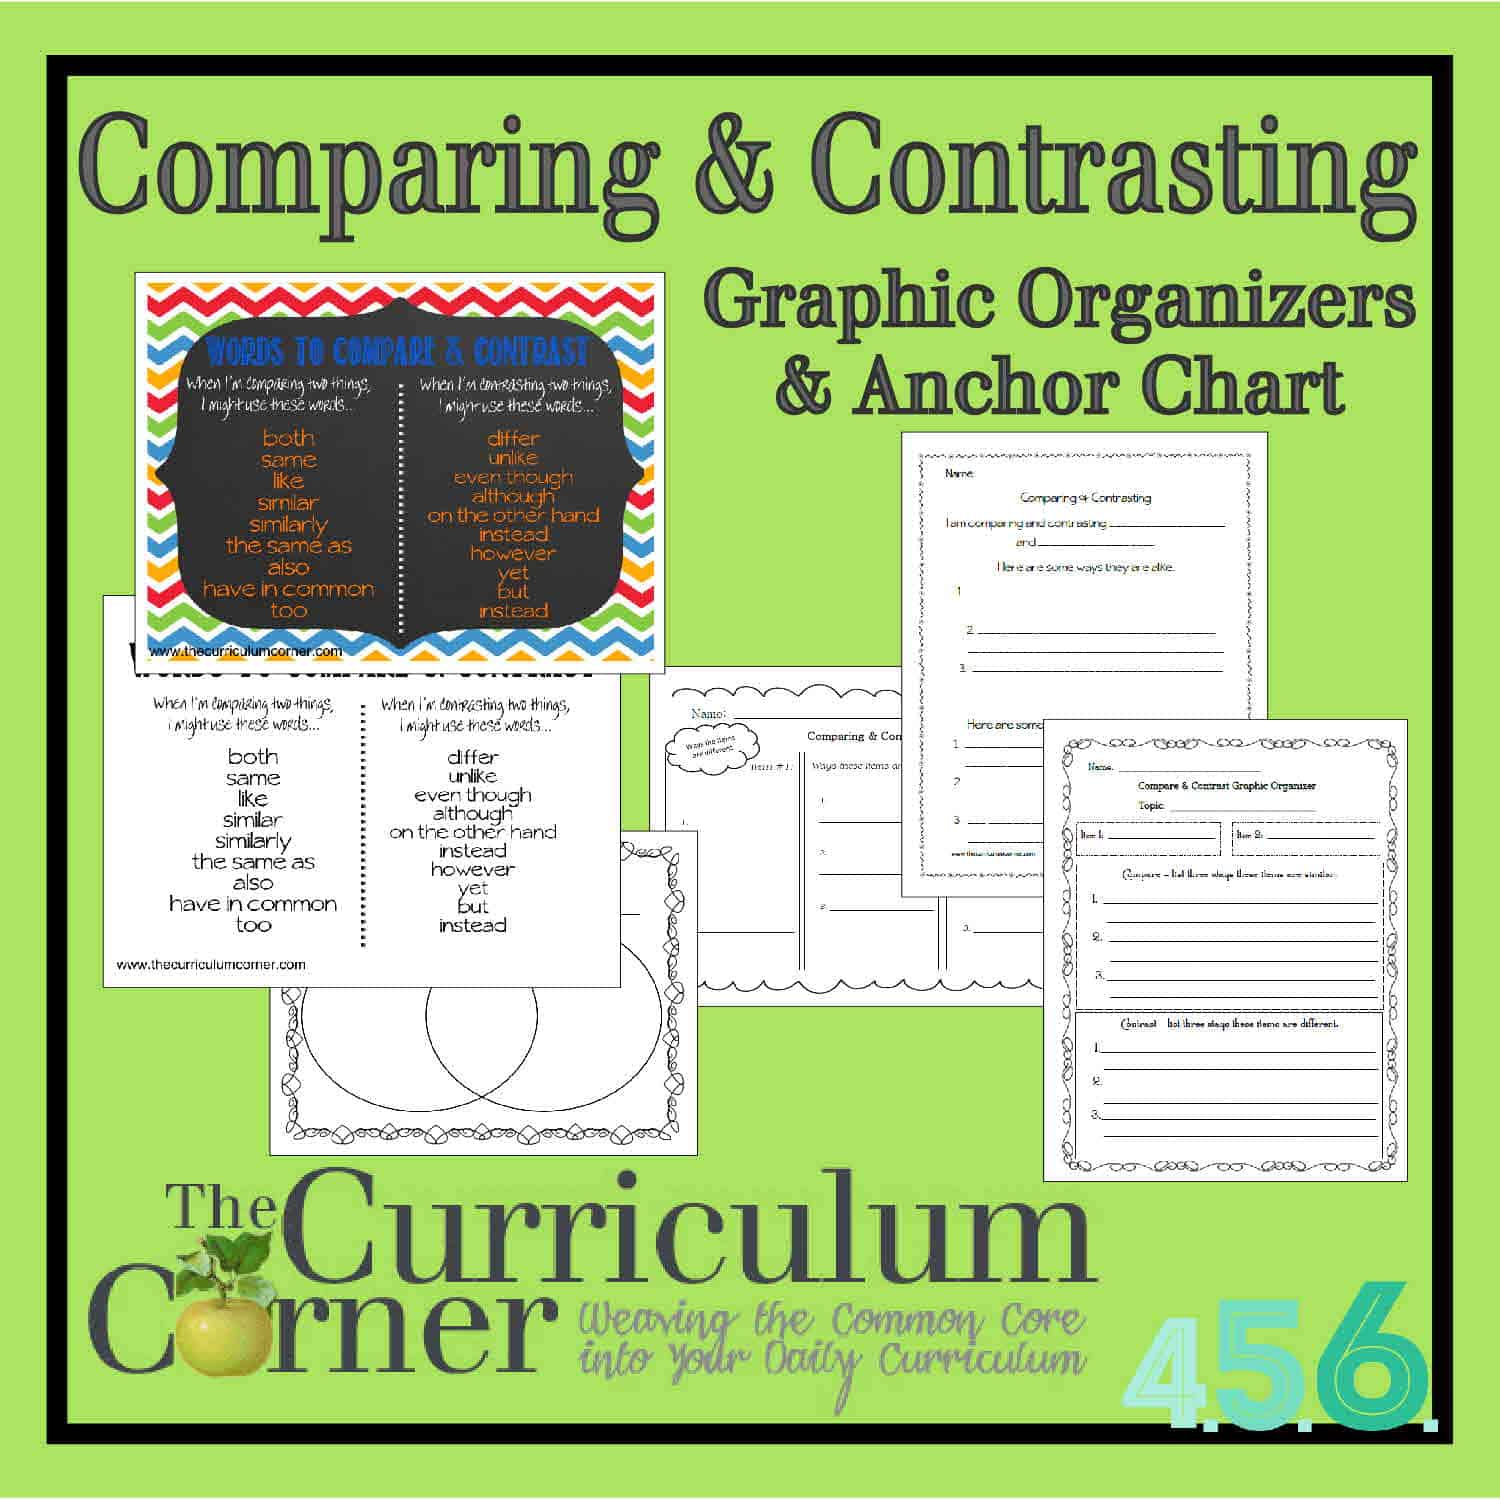 which is an example of comparing and contrasting